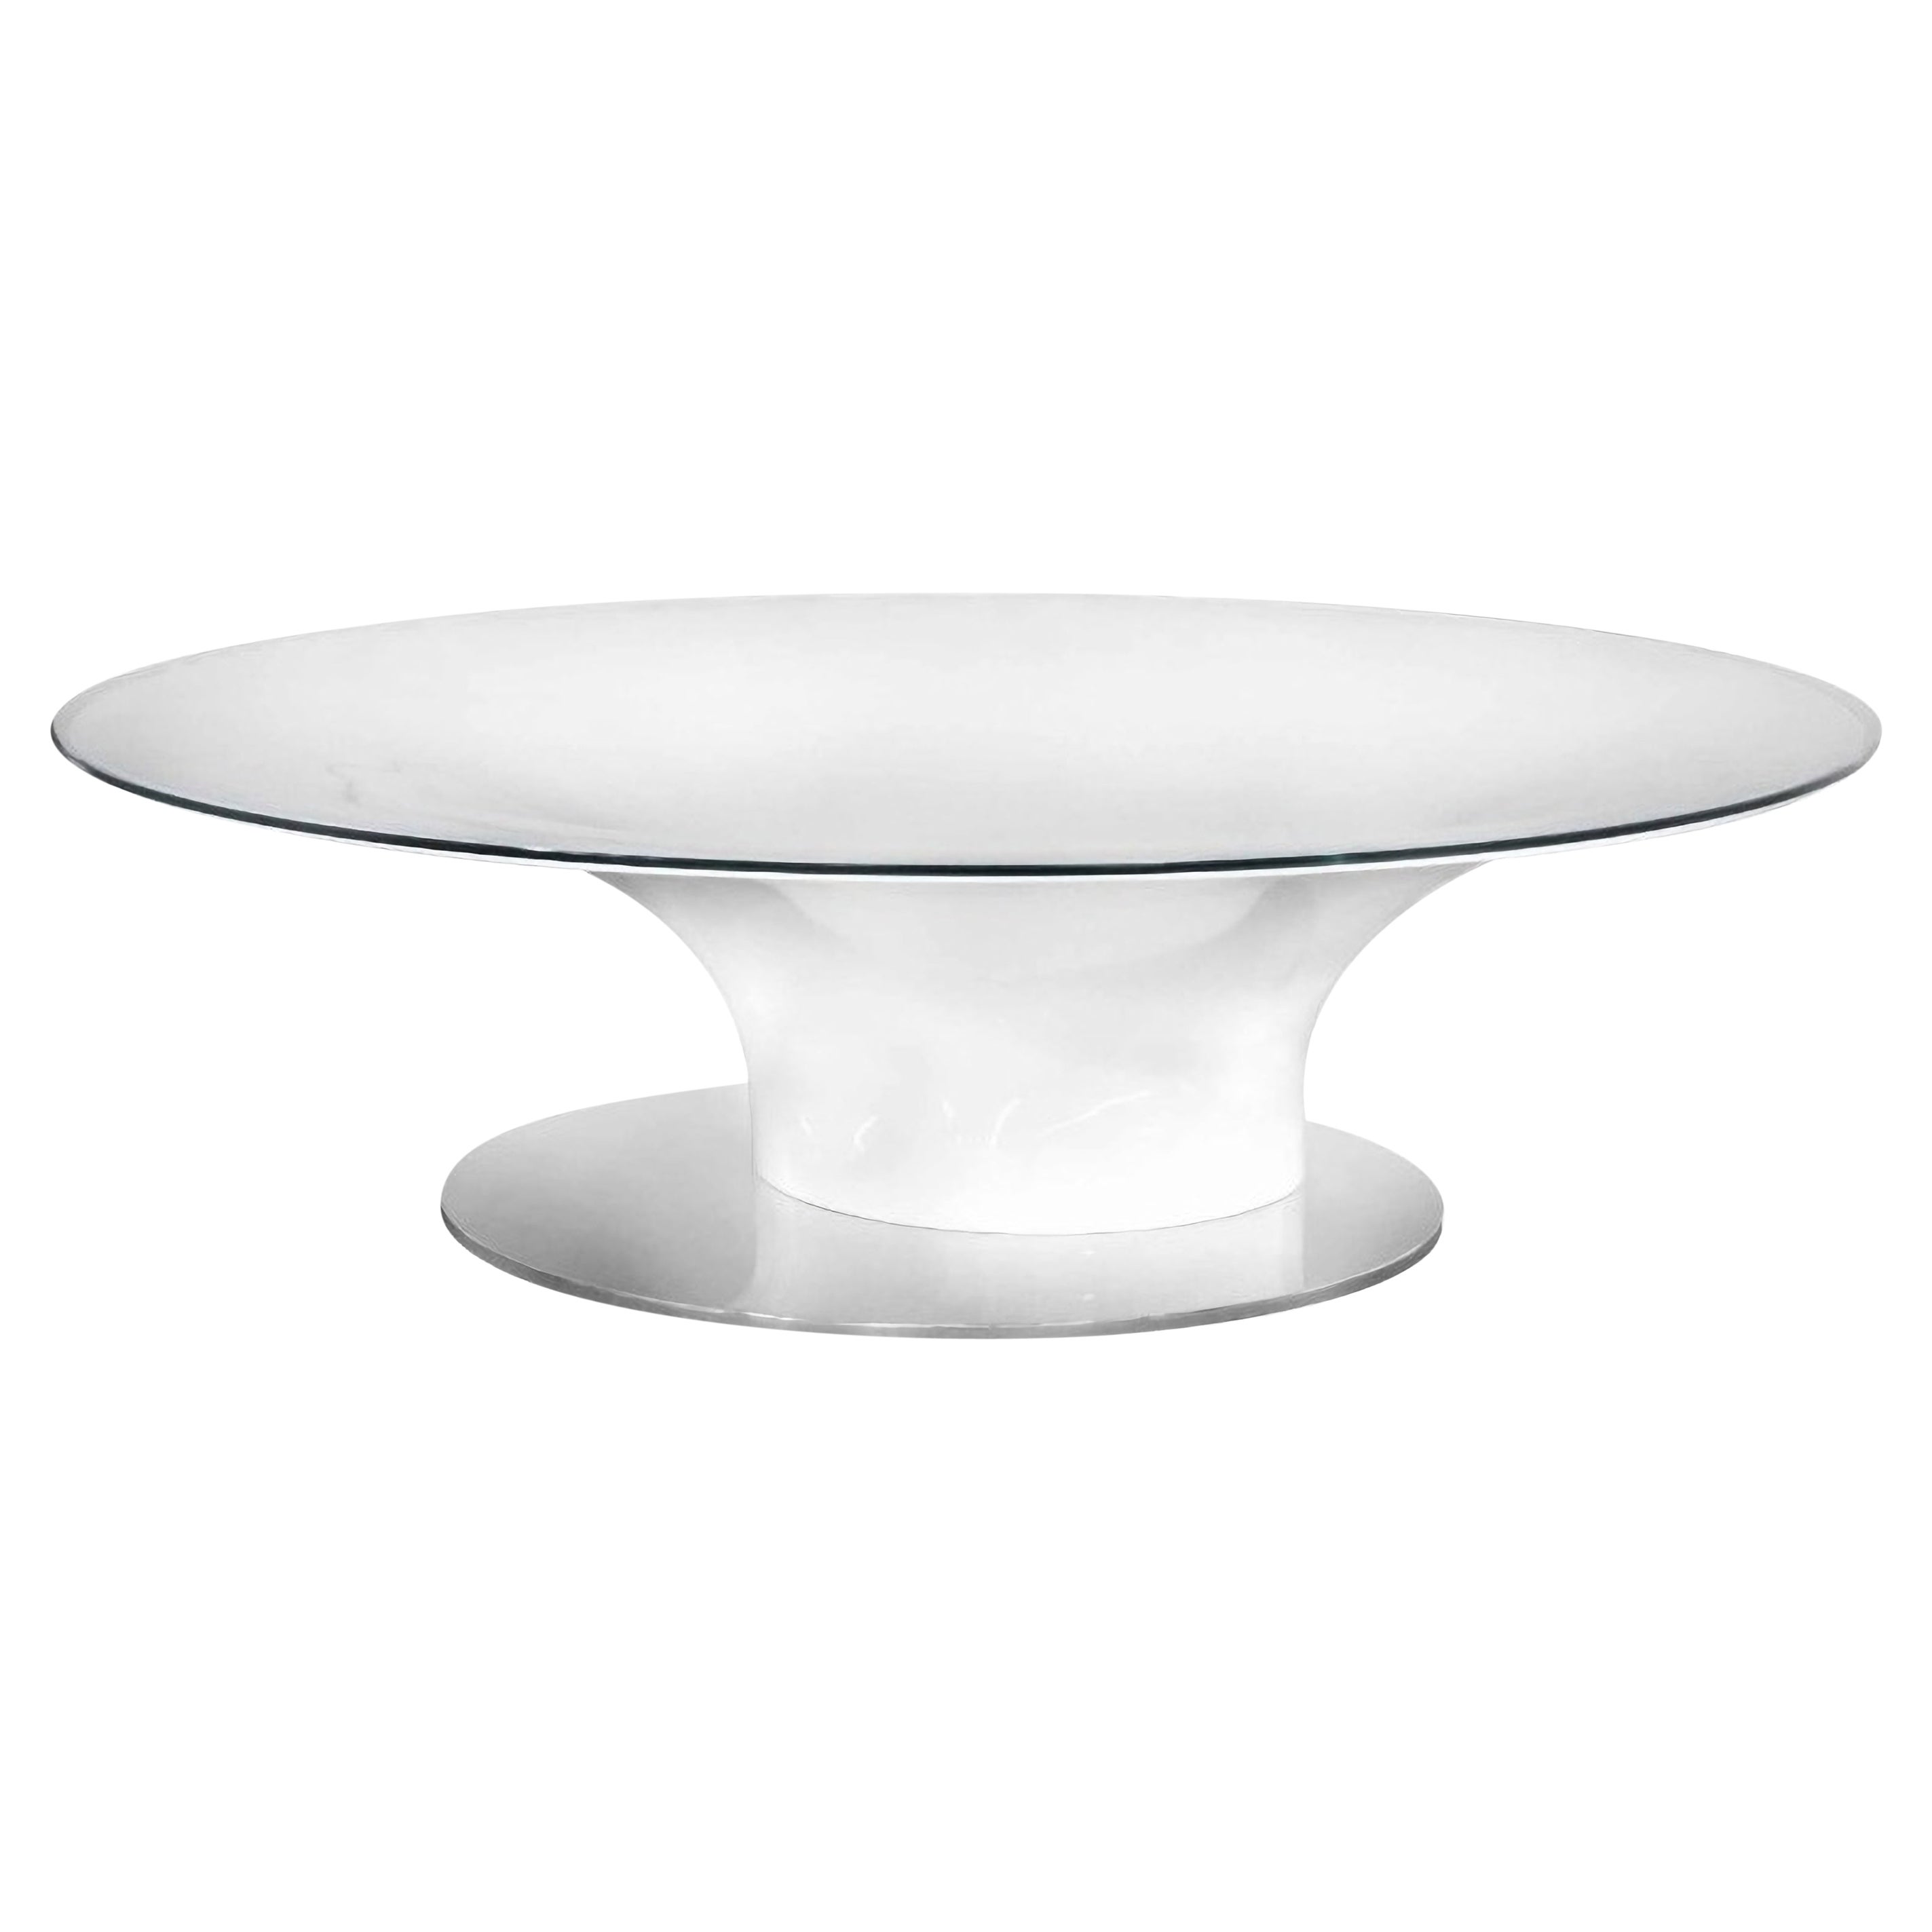 New Design Coffee Table in Lacquered White High Gloss For Sale